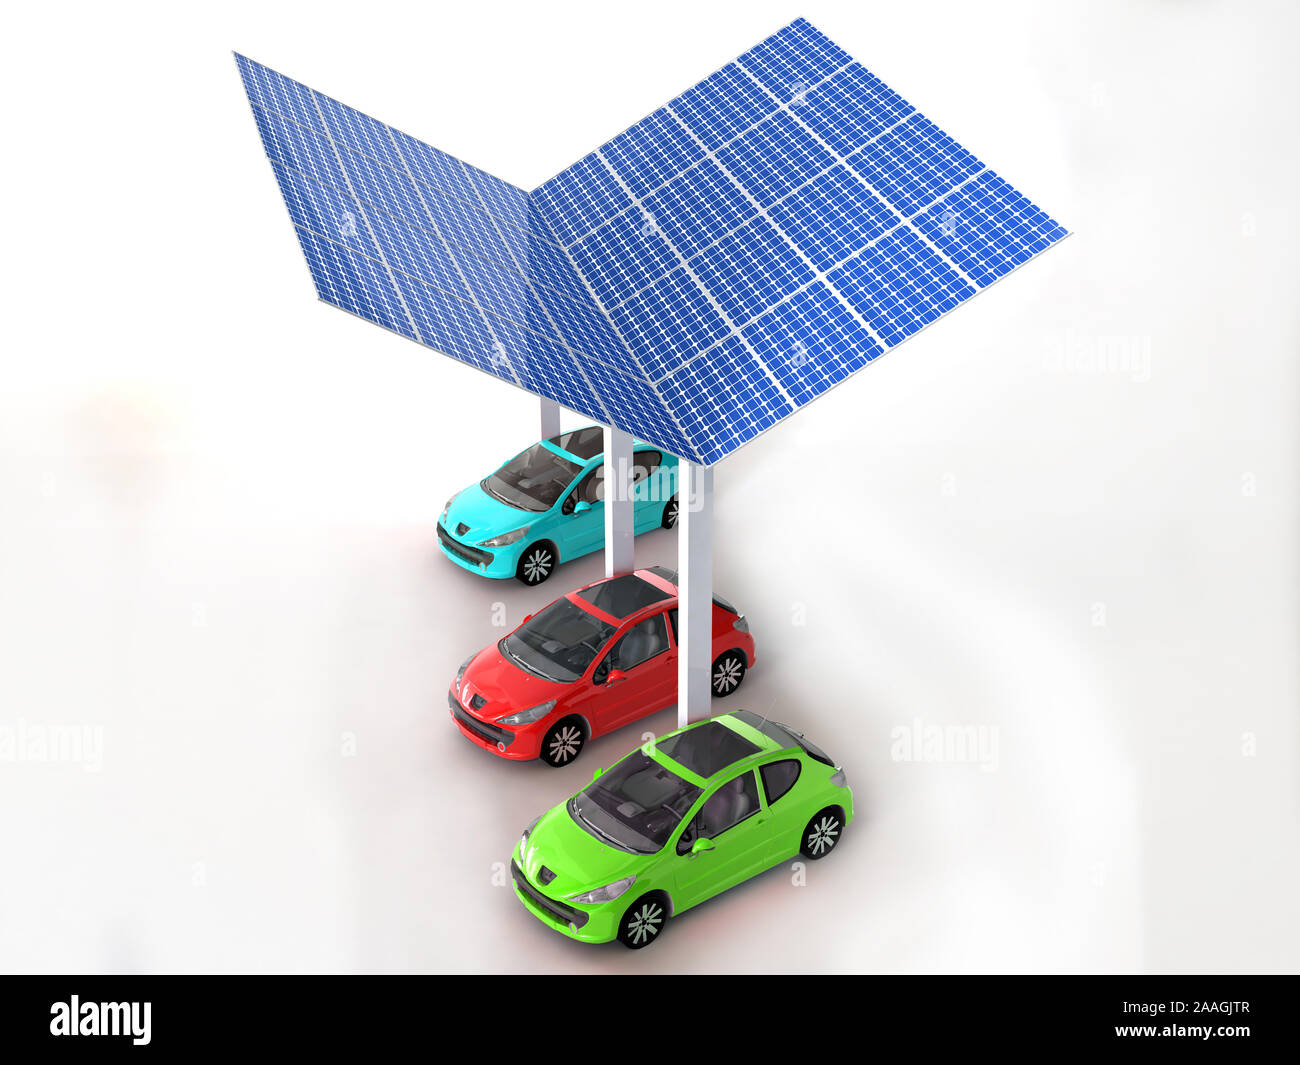 Solar energy panels for electric car charging stations concept - 3d render Stock Photo